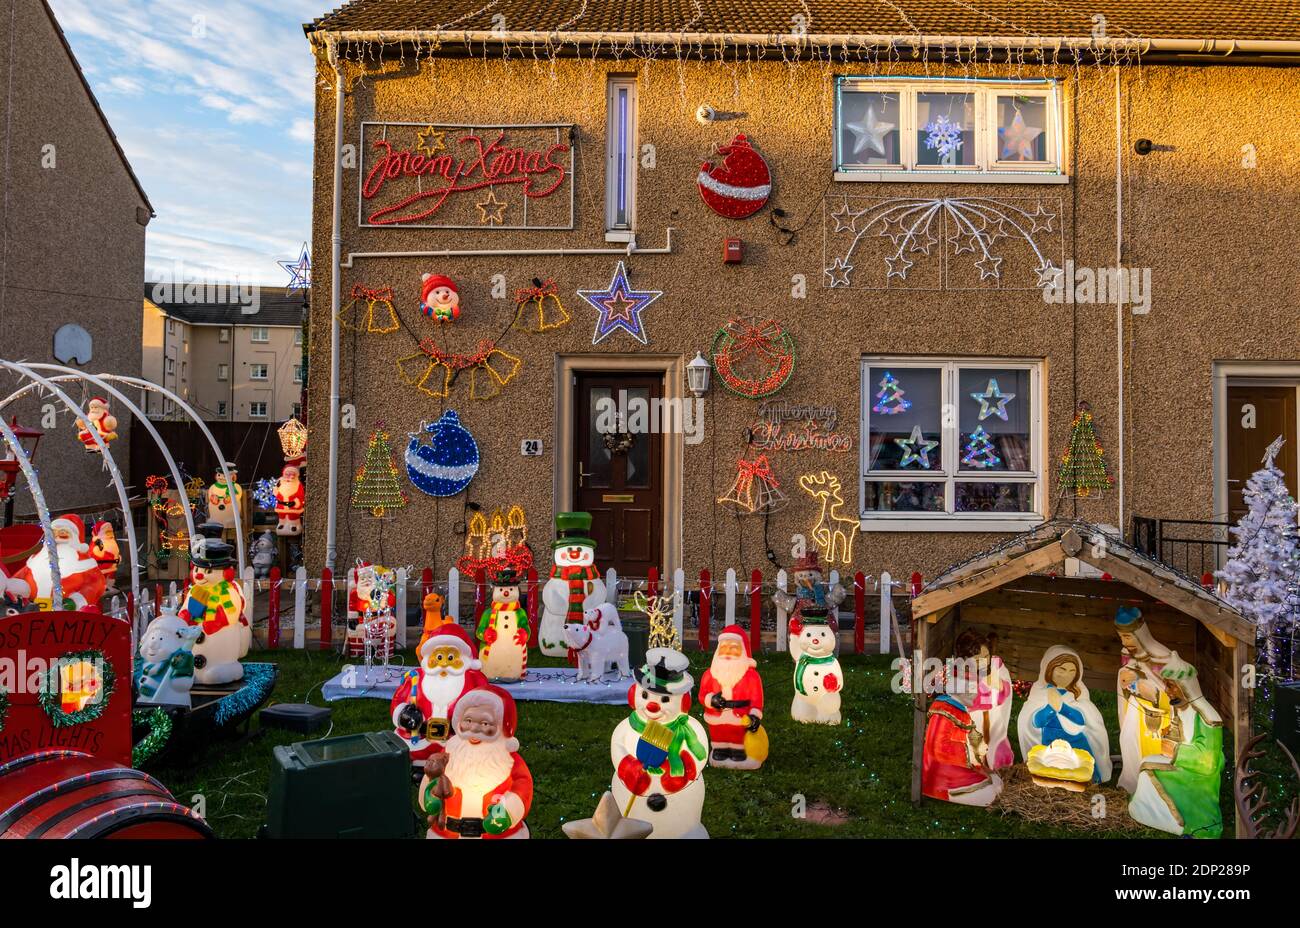 Huge Christmas decorations in the front garden of a house, Prestonpans, East Lothian, Scotland, UK Stock Photo